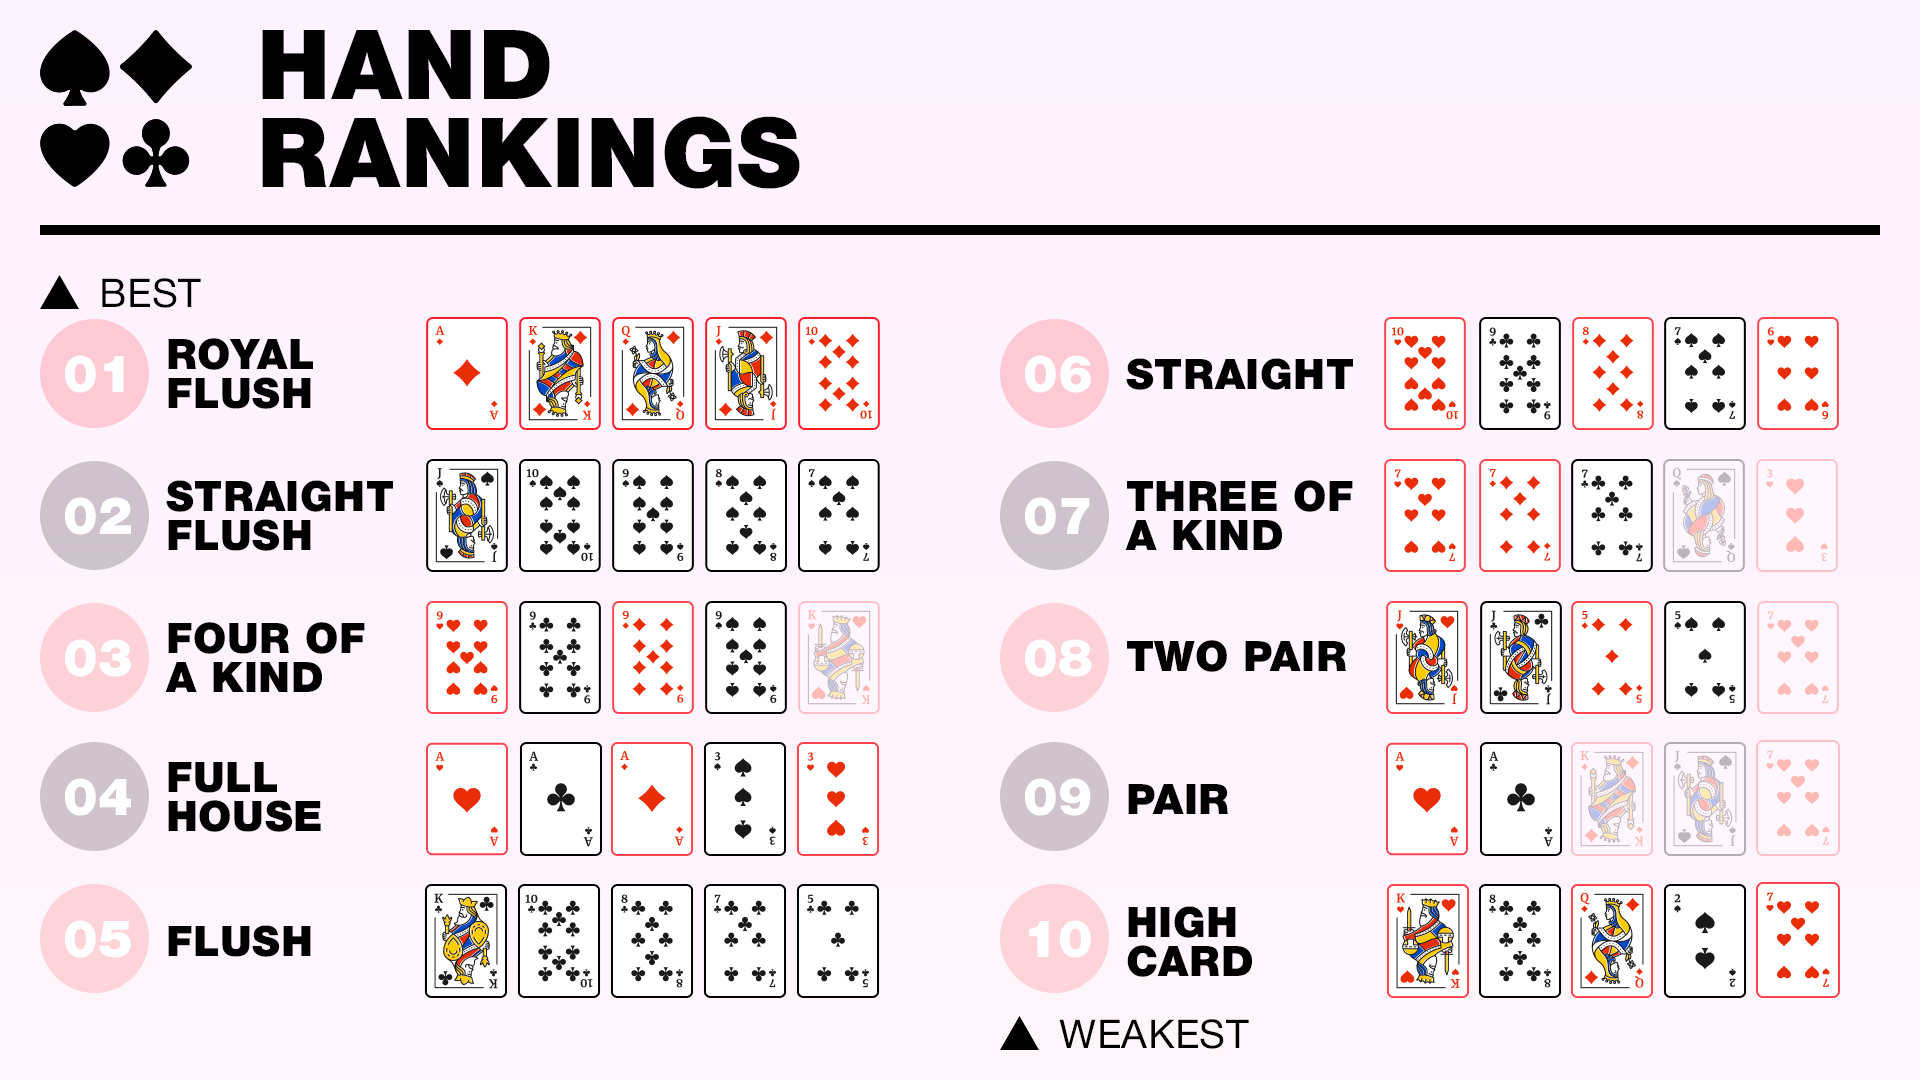 Poker Hands Order From High To Low